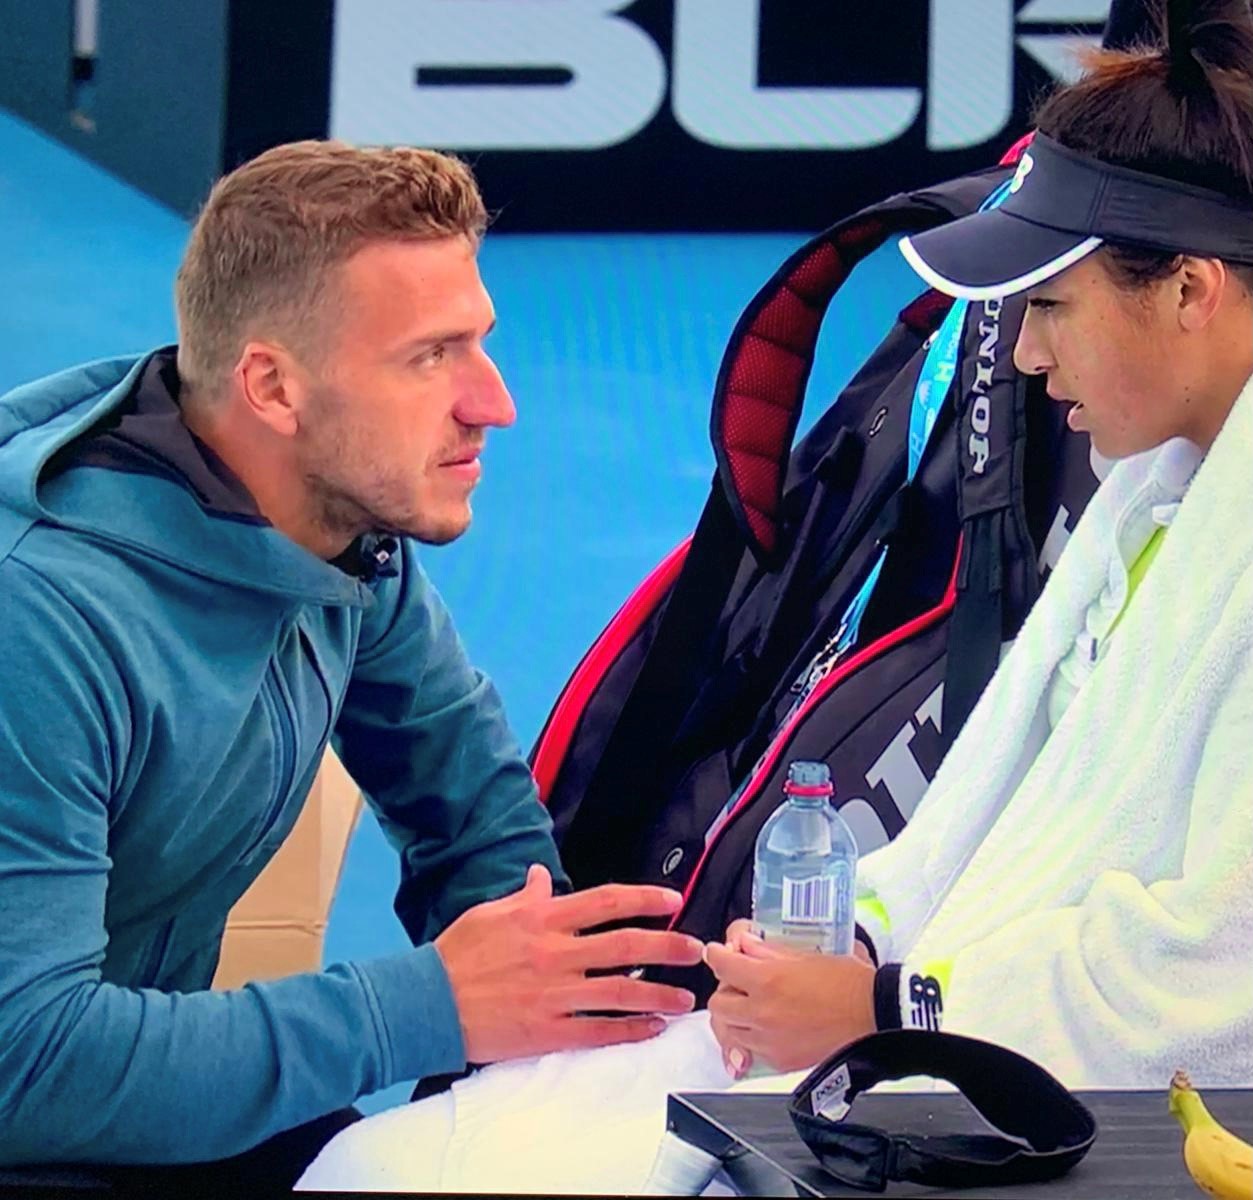 Professional tennis coach Alex Ward offers advice to a tennis player during a break.